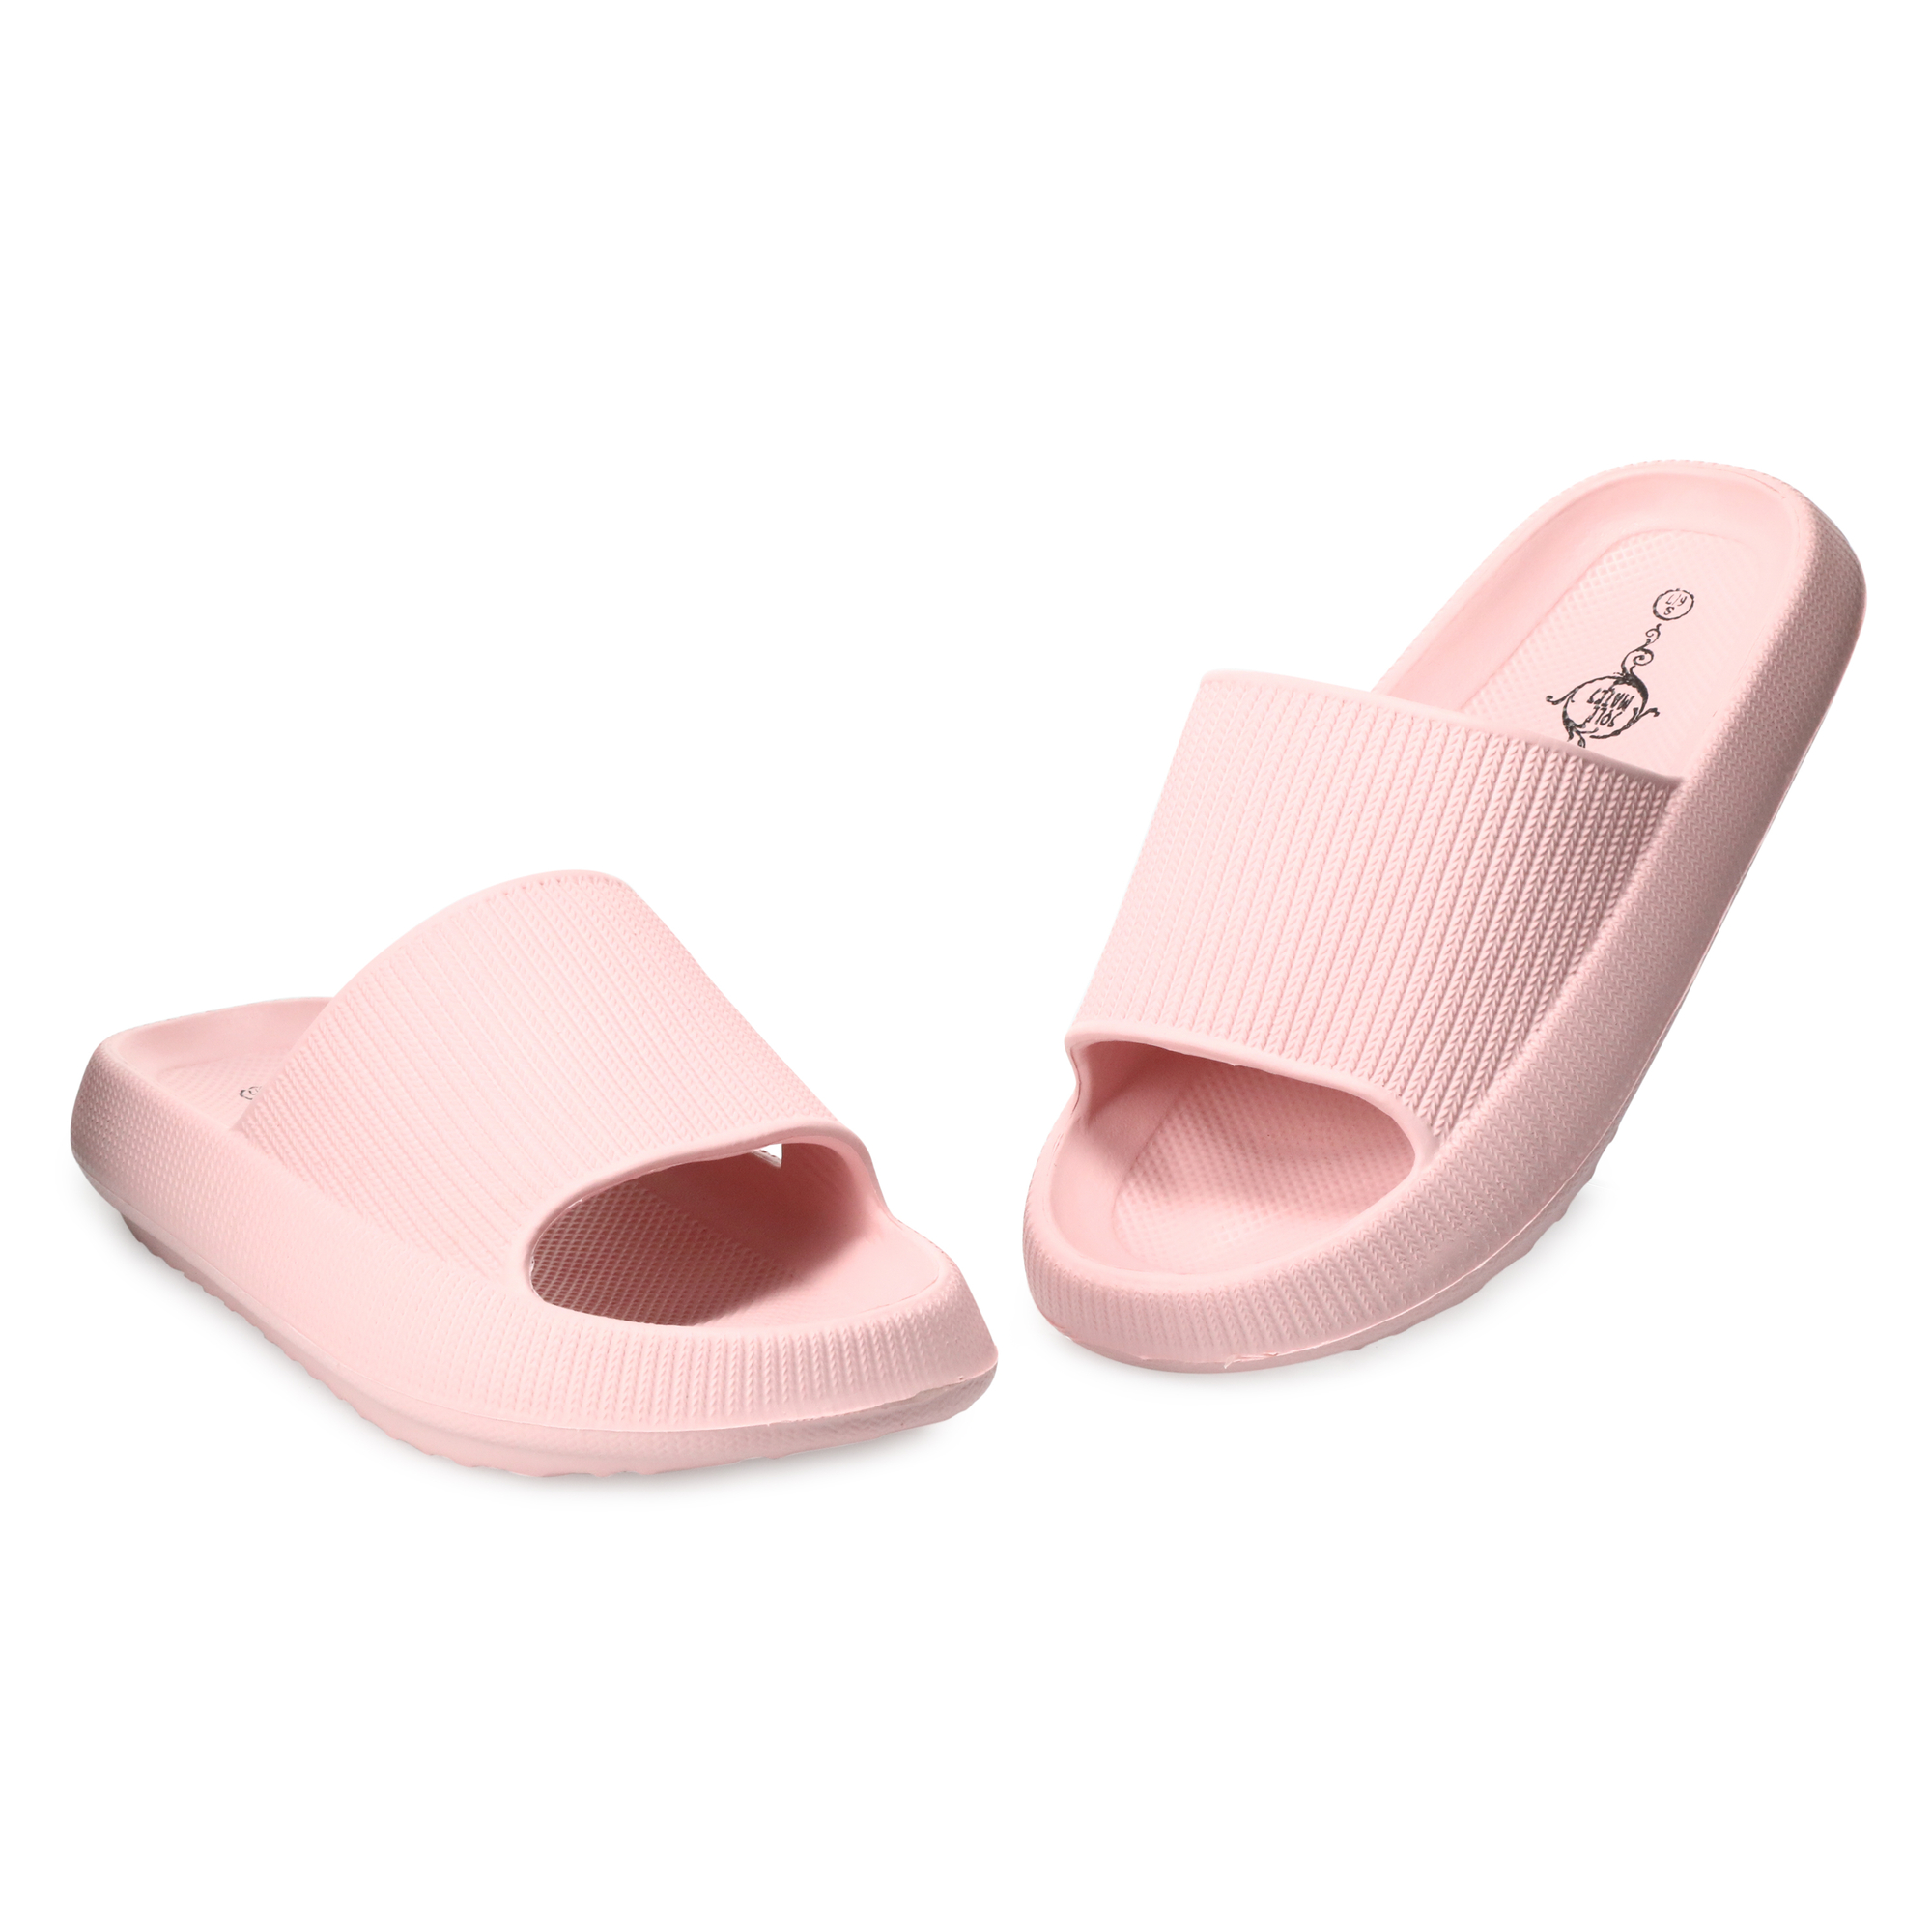 The Pillow Slides - Happy and colorful Saturday💕✨ Do you like neutral or  colorful outfits? Comment below #sandals #colorful #slides #shoes #pink  #wearpink #fashion #ootd #saturdayvibes #goodvibes #influencer  #pillowslides